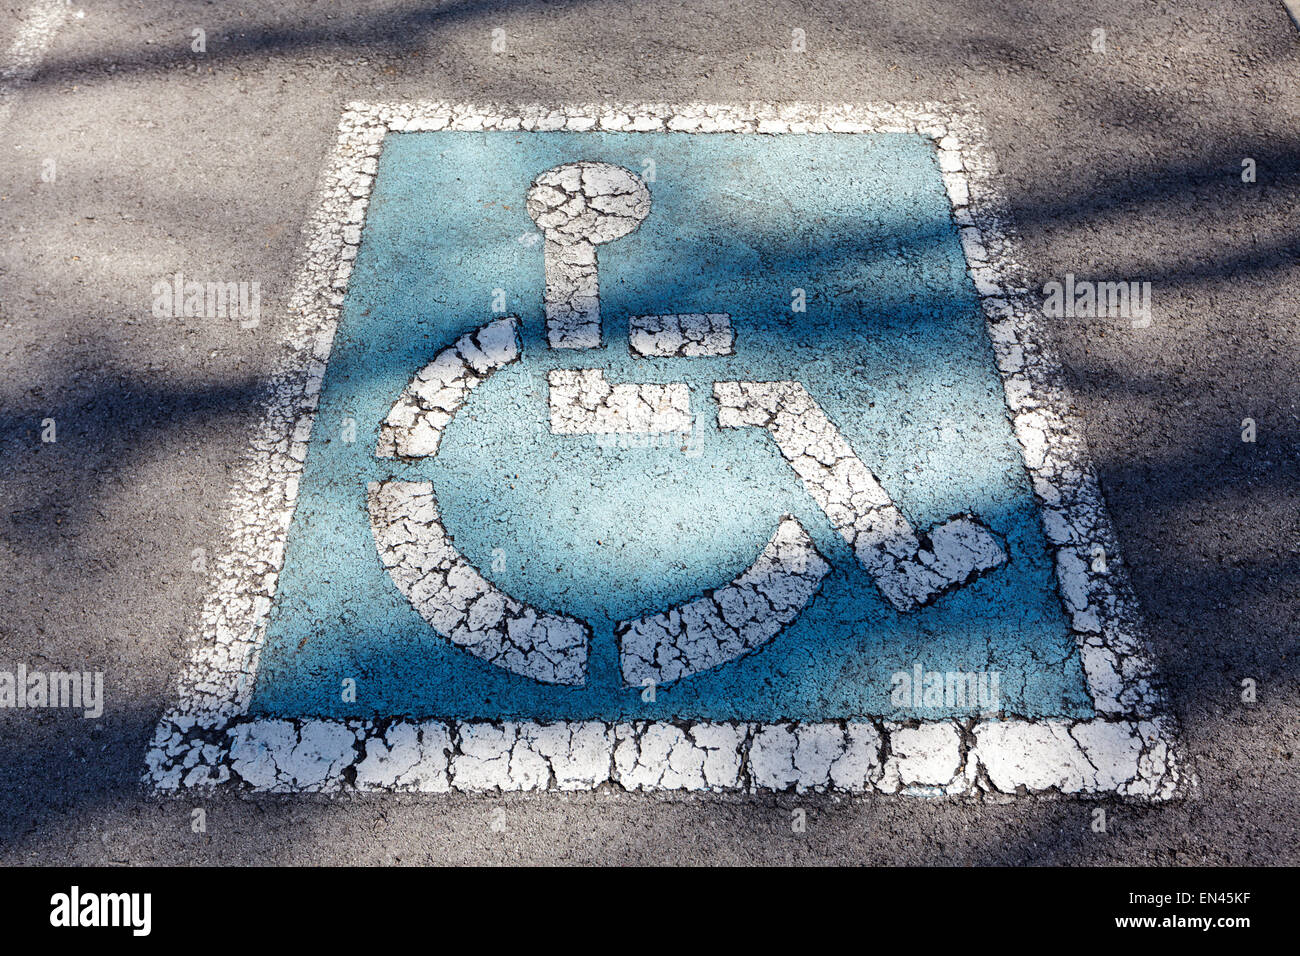 Universal symbol for handicapped parking Stock Photo